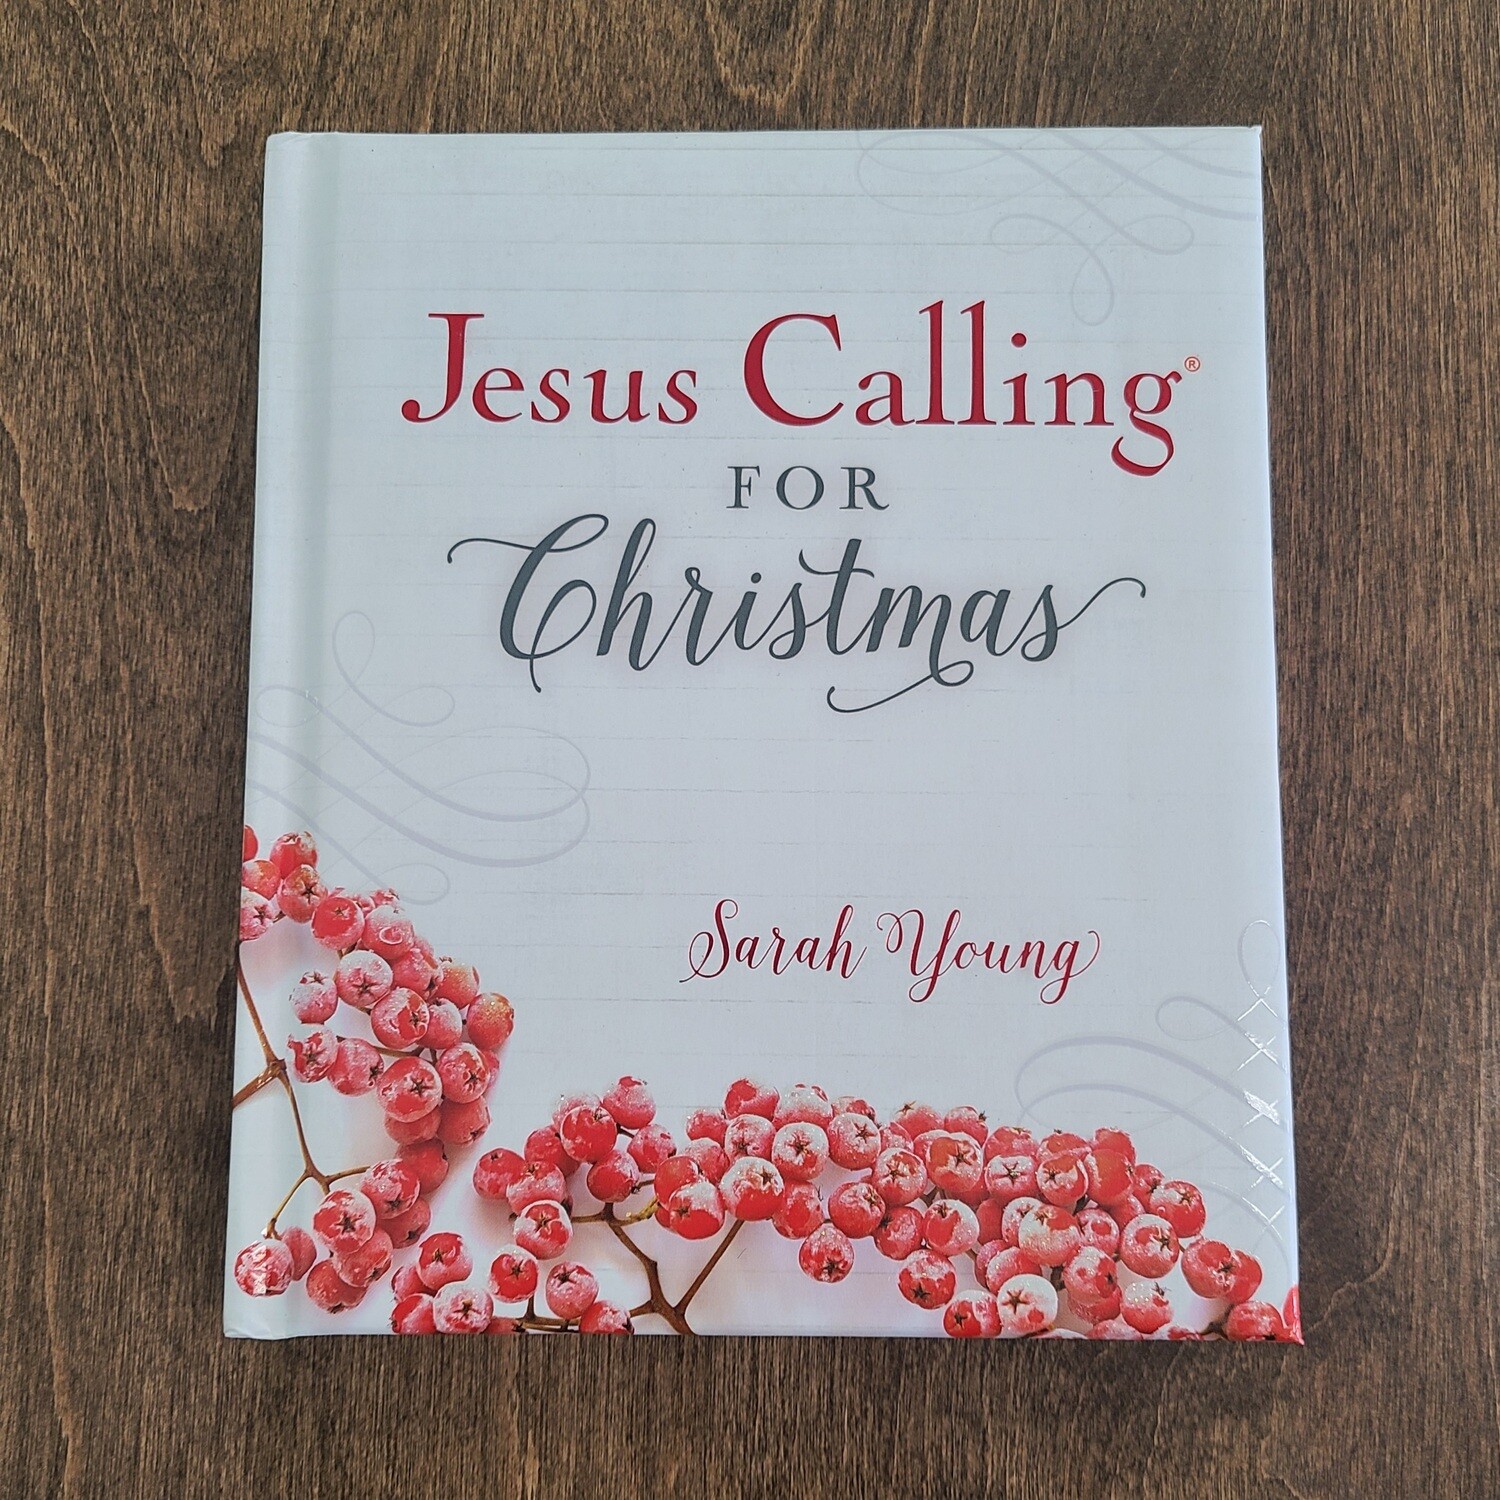 Jesus Calling for Christmas by Sarah Young